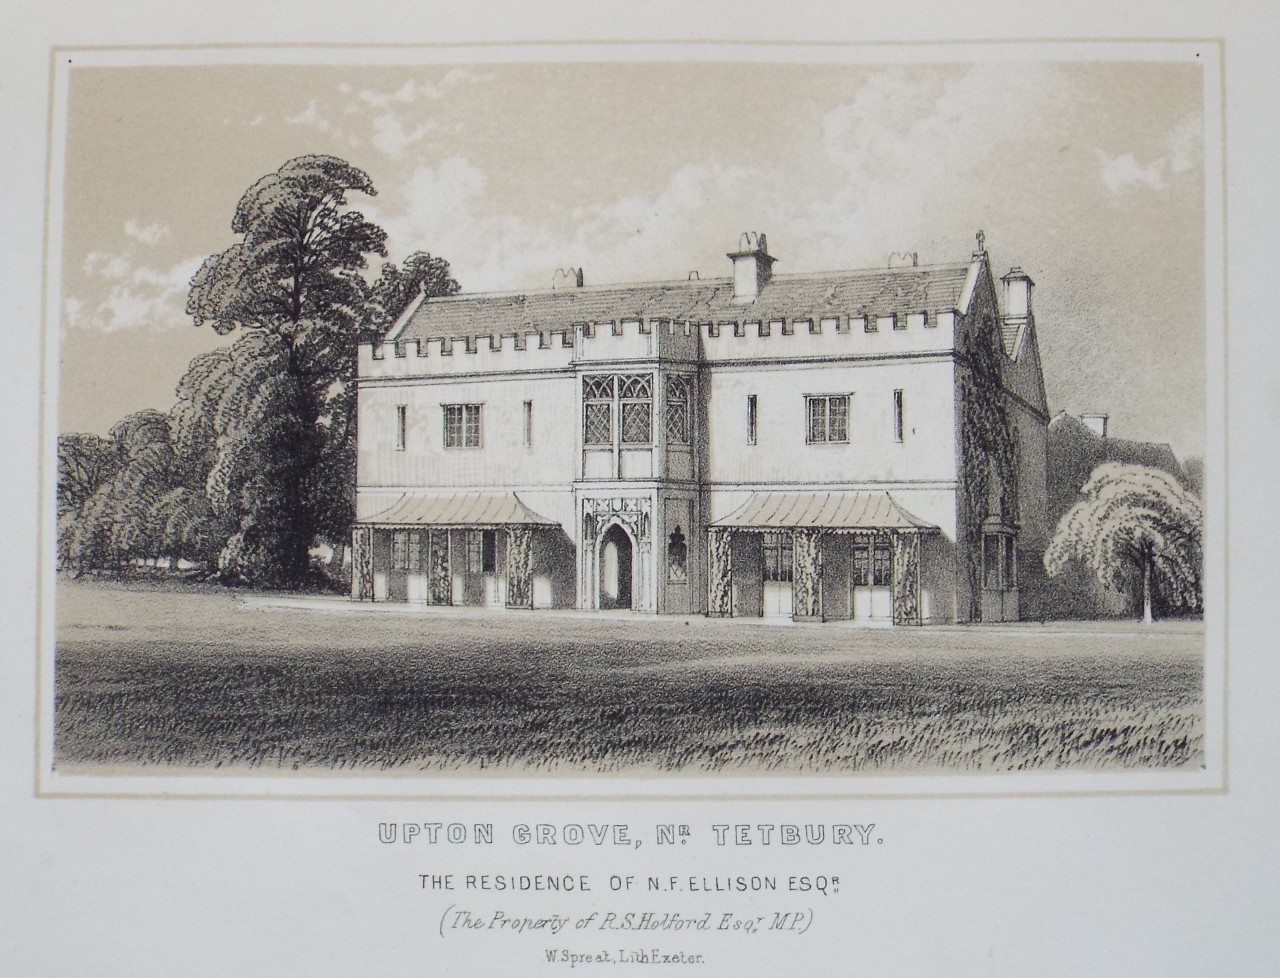 Lithograph - Upton Grove, Nr. Tetbury. The Residence of N. F. Ellison Esqr. (The Property of R. S. Holford, Esqr. M. P.) - Spreat